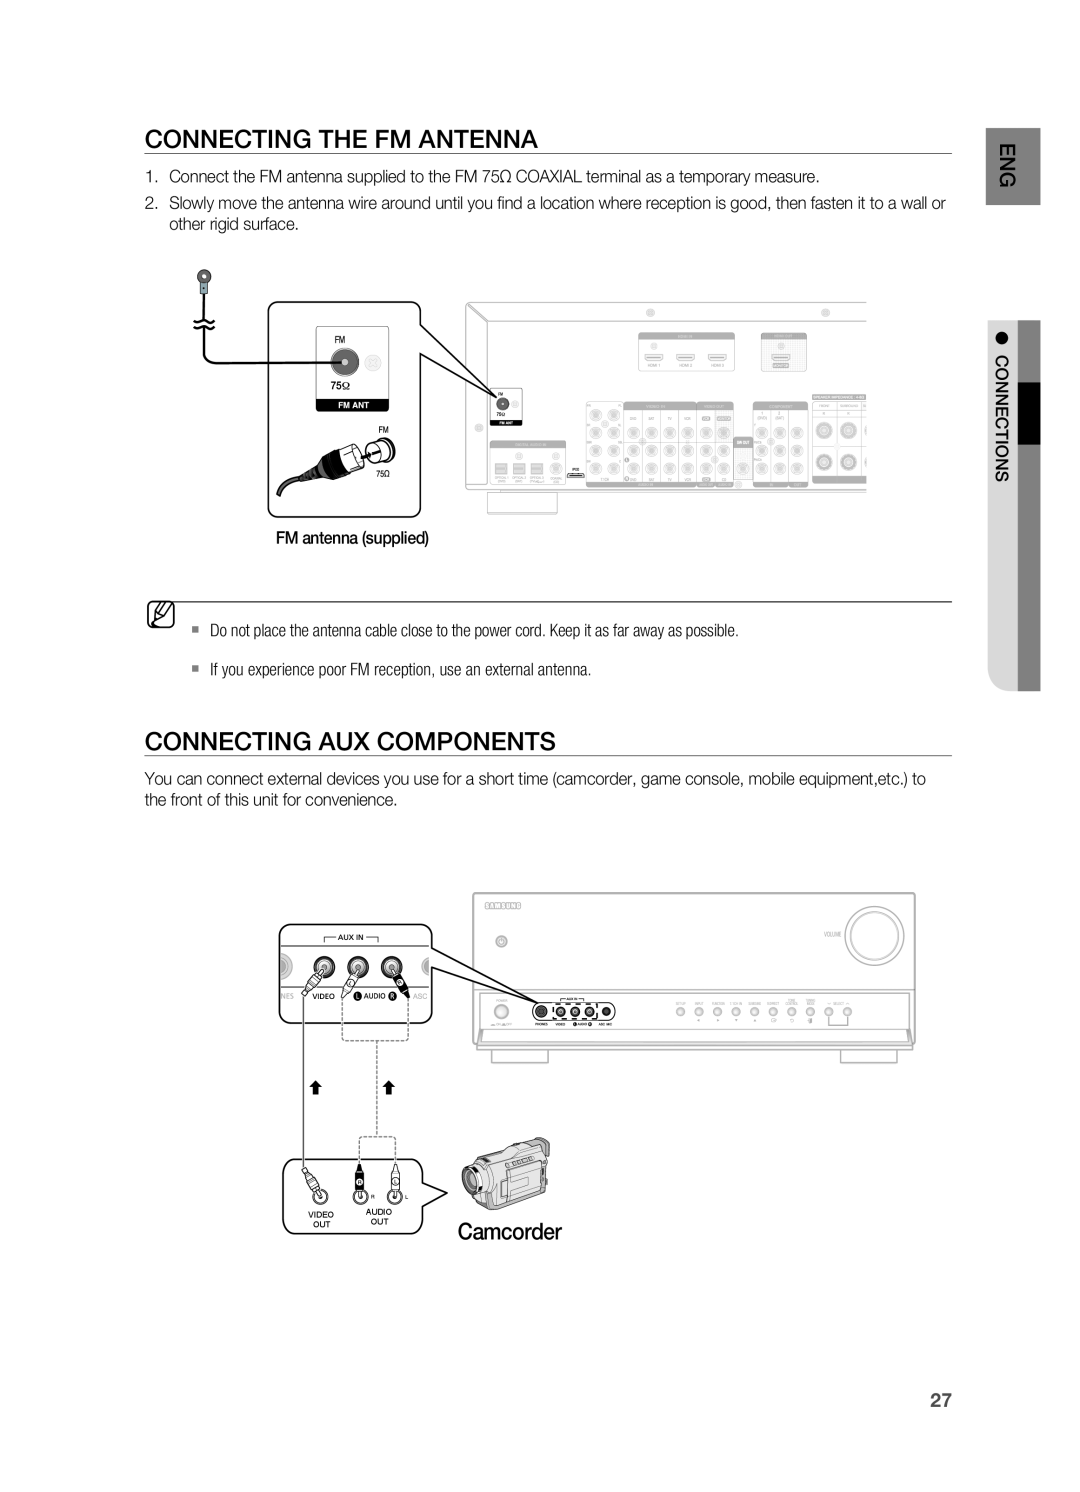 Samsung HT-AS730ST user manual COnneCting tHe fM antenna, COnneCting aUX COMPOnentS, Camcorder 